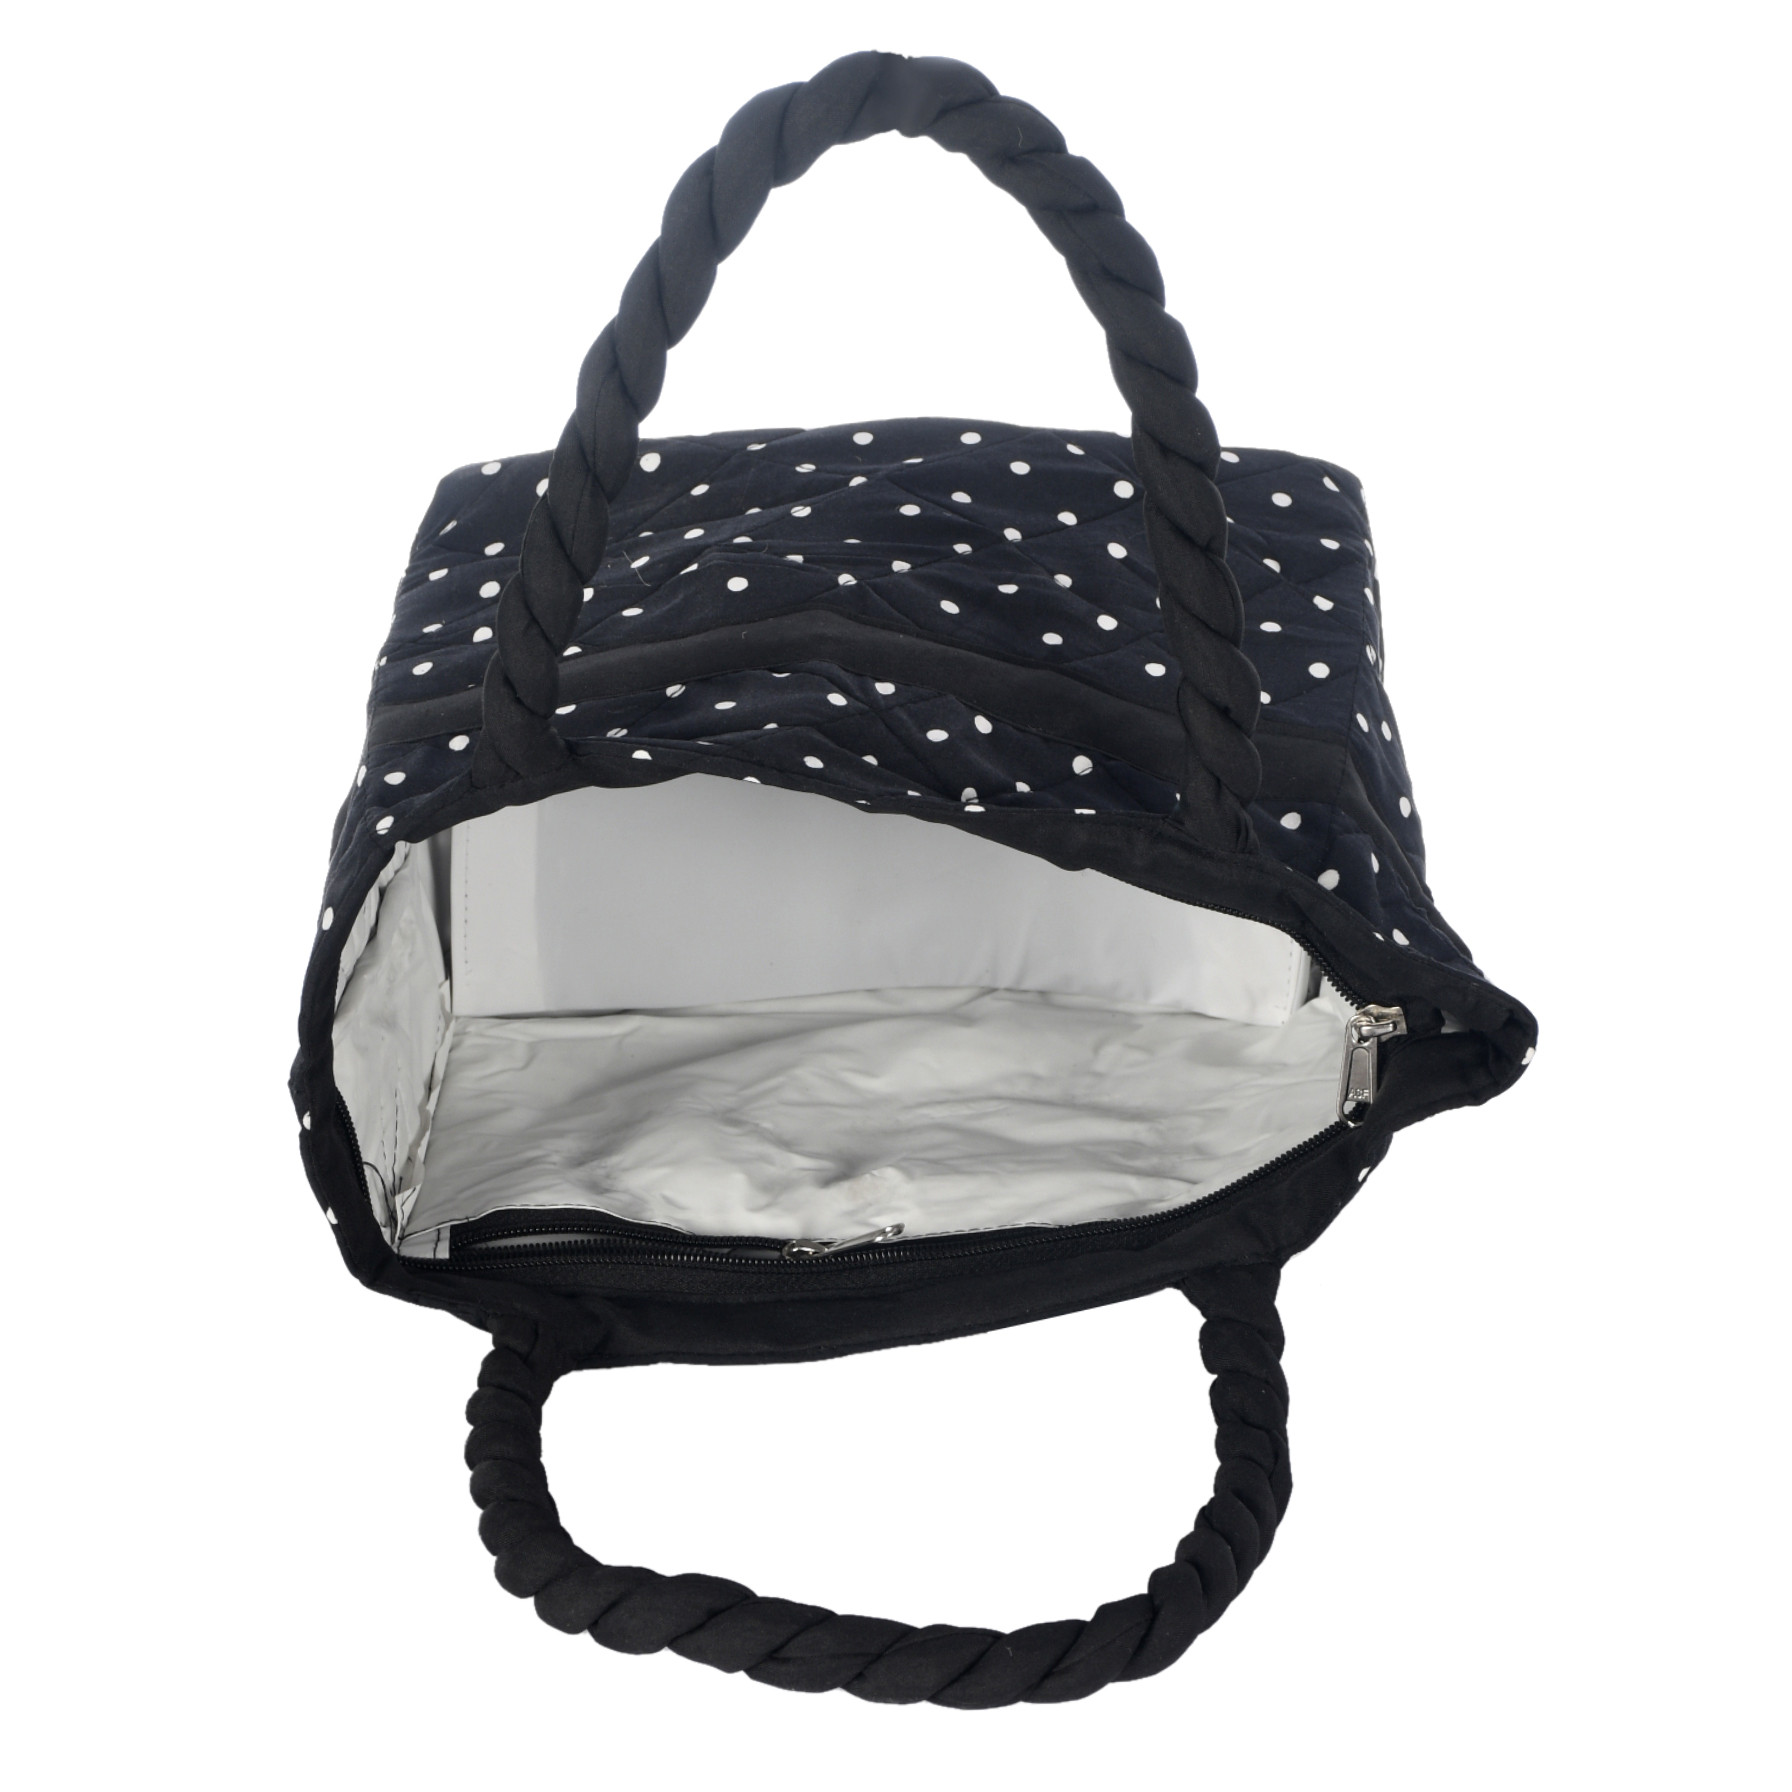 Kuber Industries Dot Print Hand Bag, Bow Bag For Women/Girls With Handle (Black)